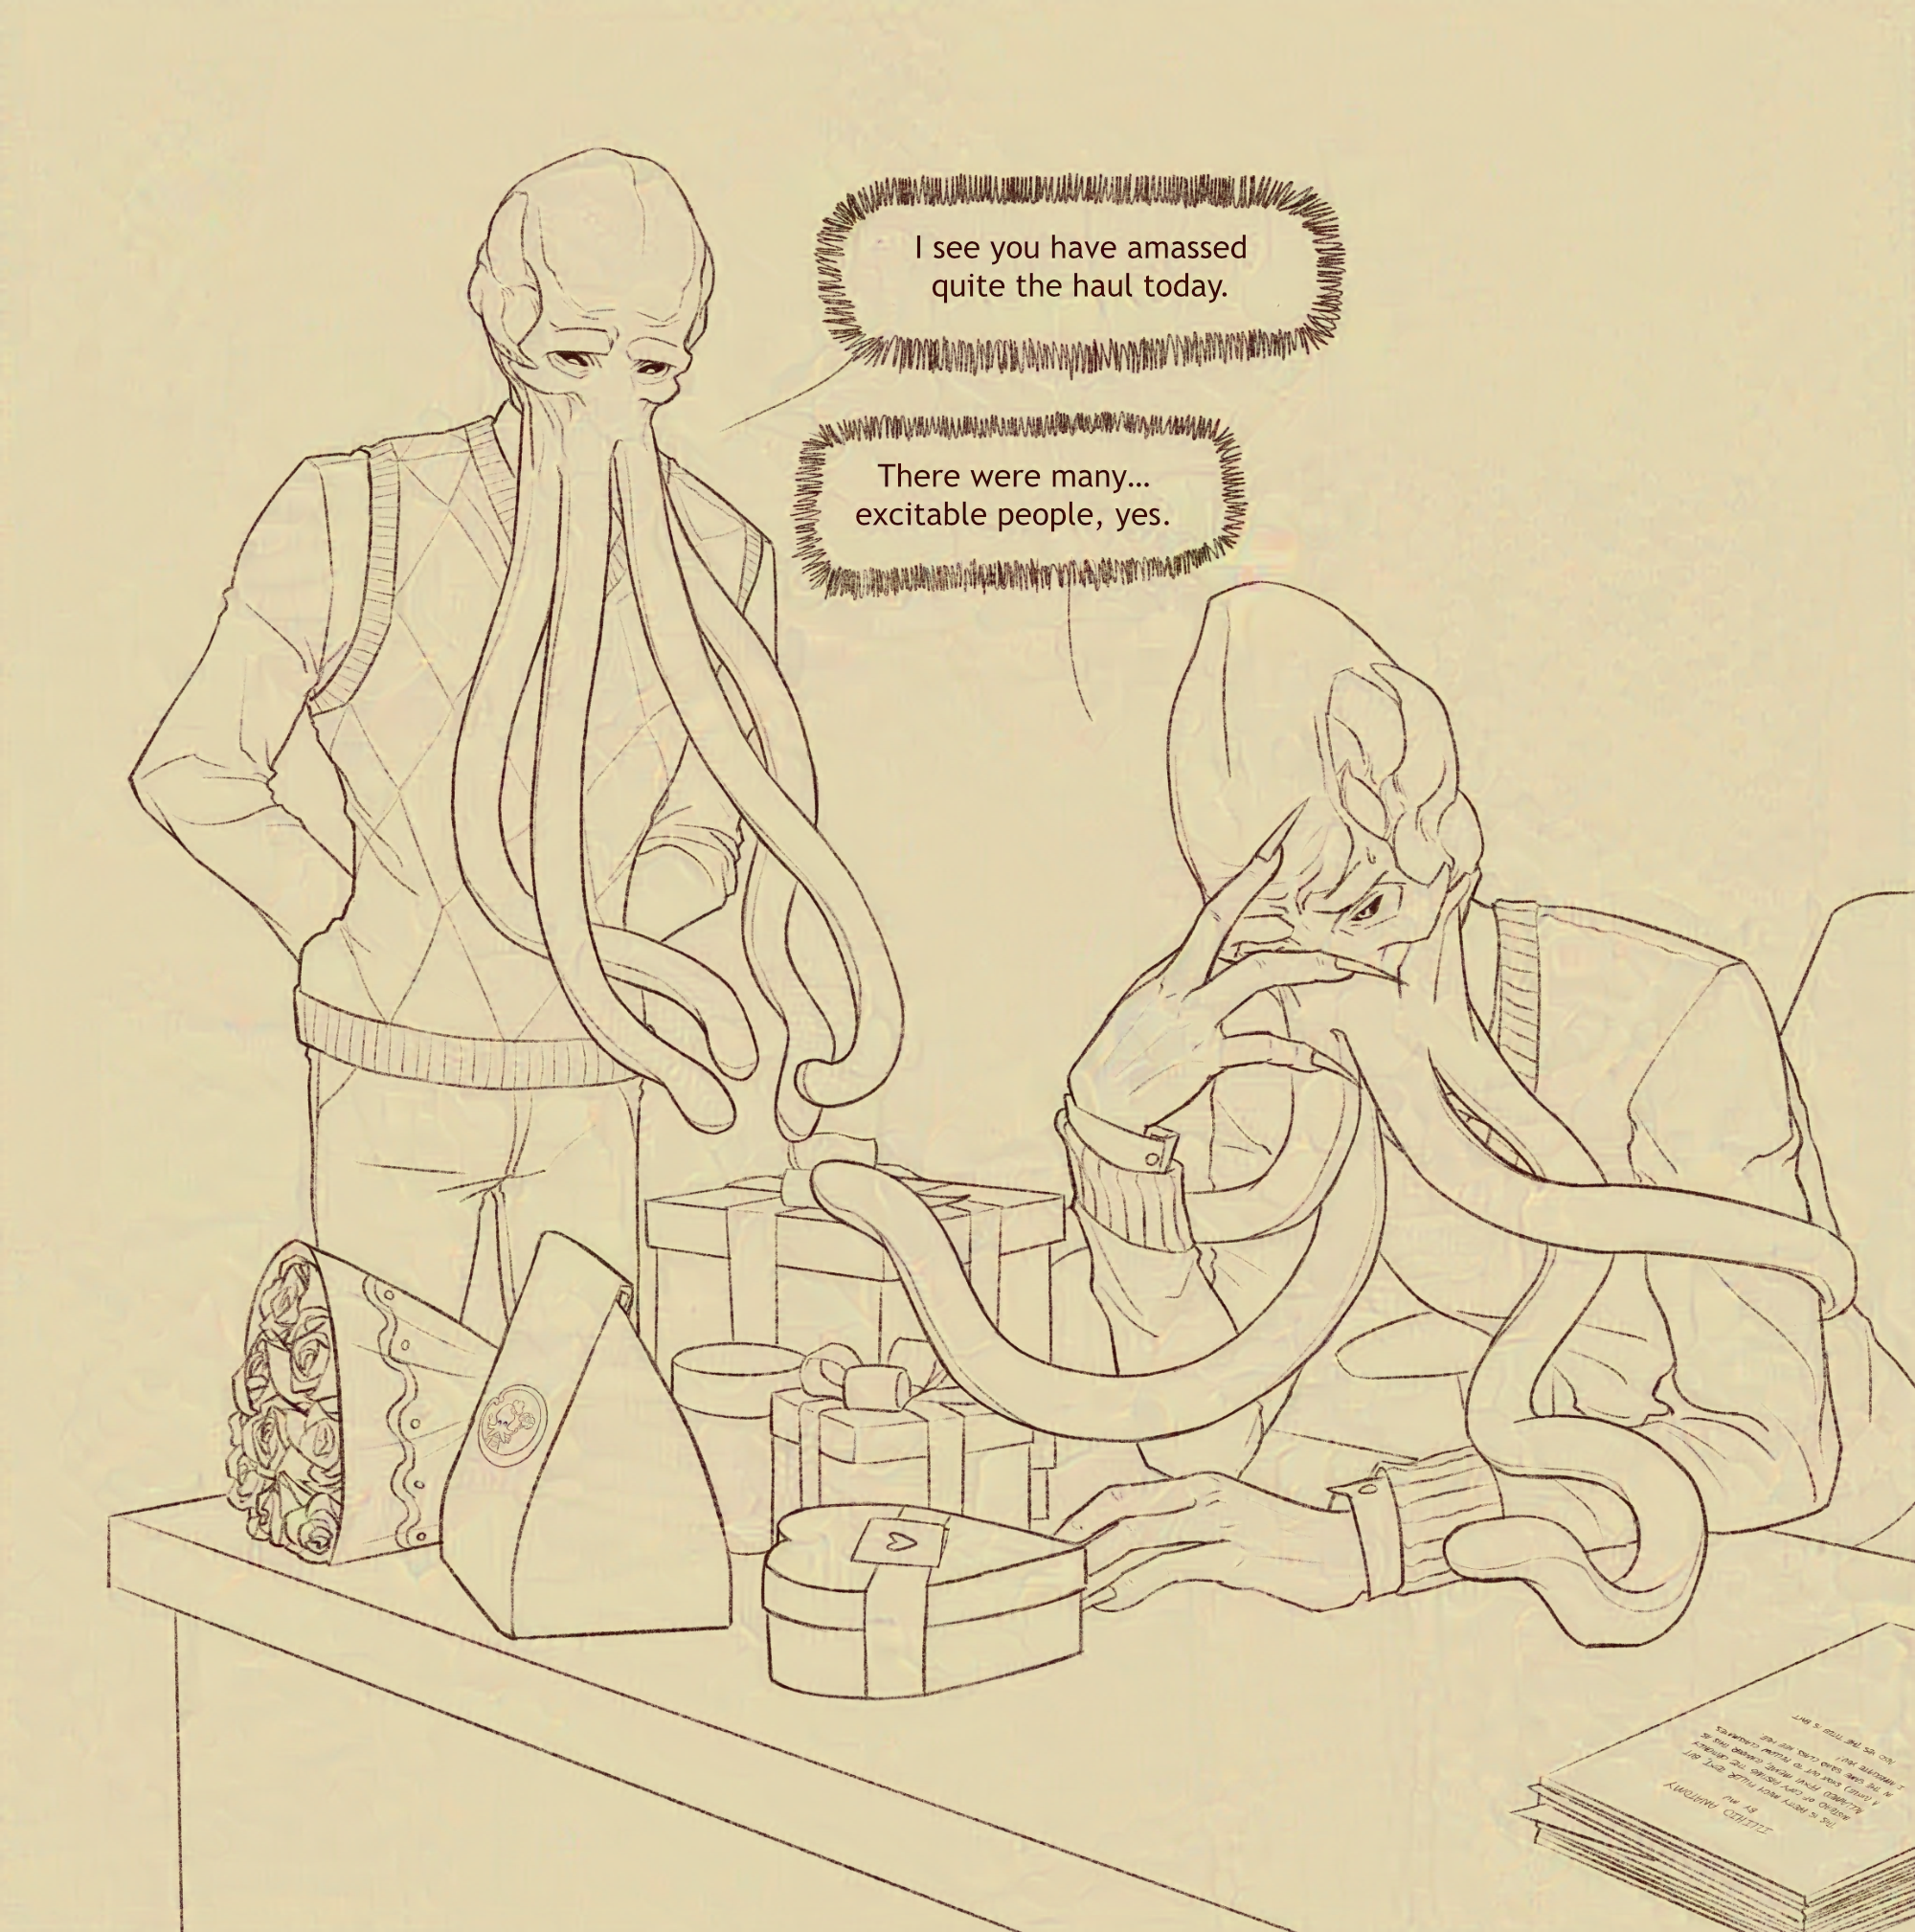 Two illithids (The Emperor and Omeluum) are dressed in modern office wear. The Emperor is sitting at its desk and has its head resting against its hand looking distressed, while Omeluum is standing next to it looking down amused at the multitude of presents on the desk. Omeluum: 'I see you have amassed quite the haul today.' Emperor: 'There were many... excitable people, yes.'